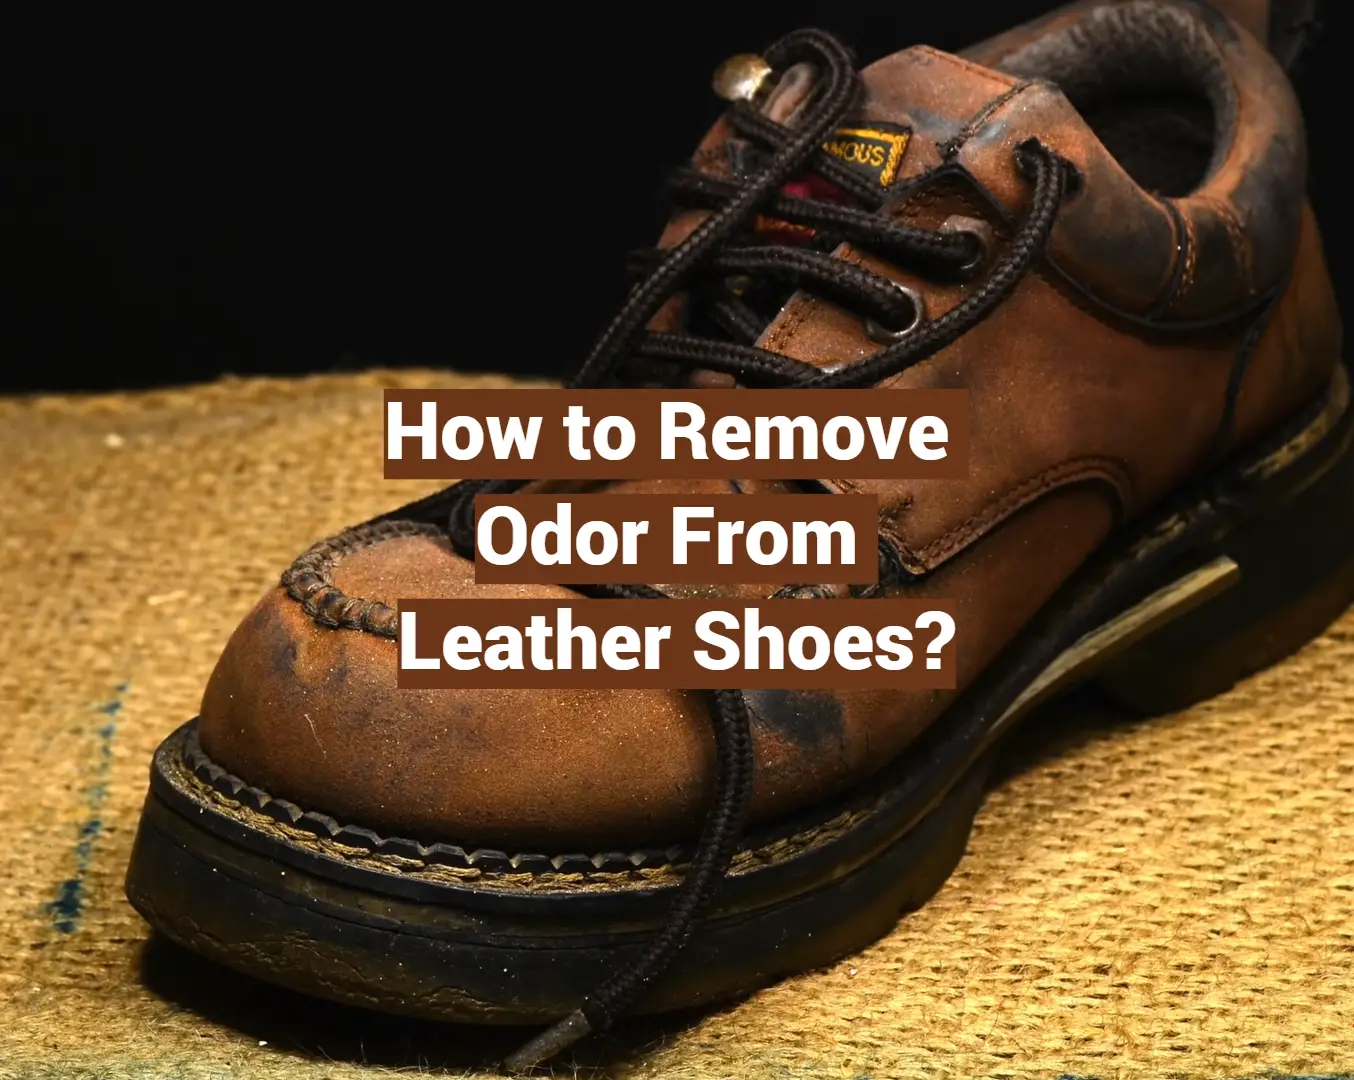 How to Remove Odor From Leather Shoes?